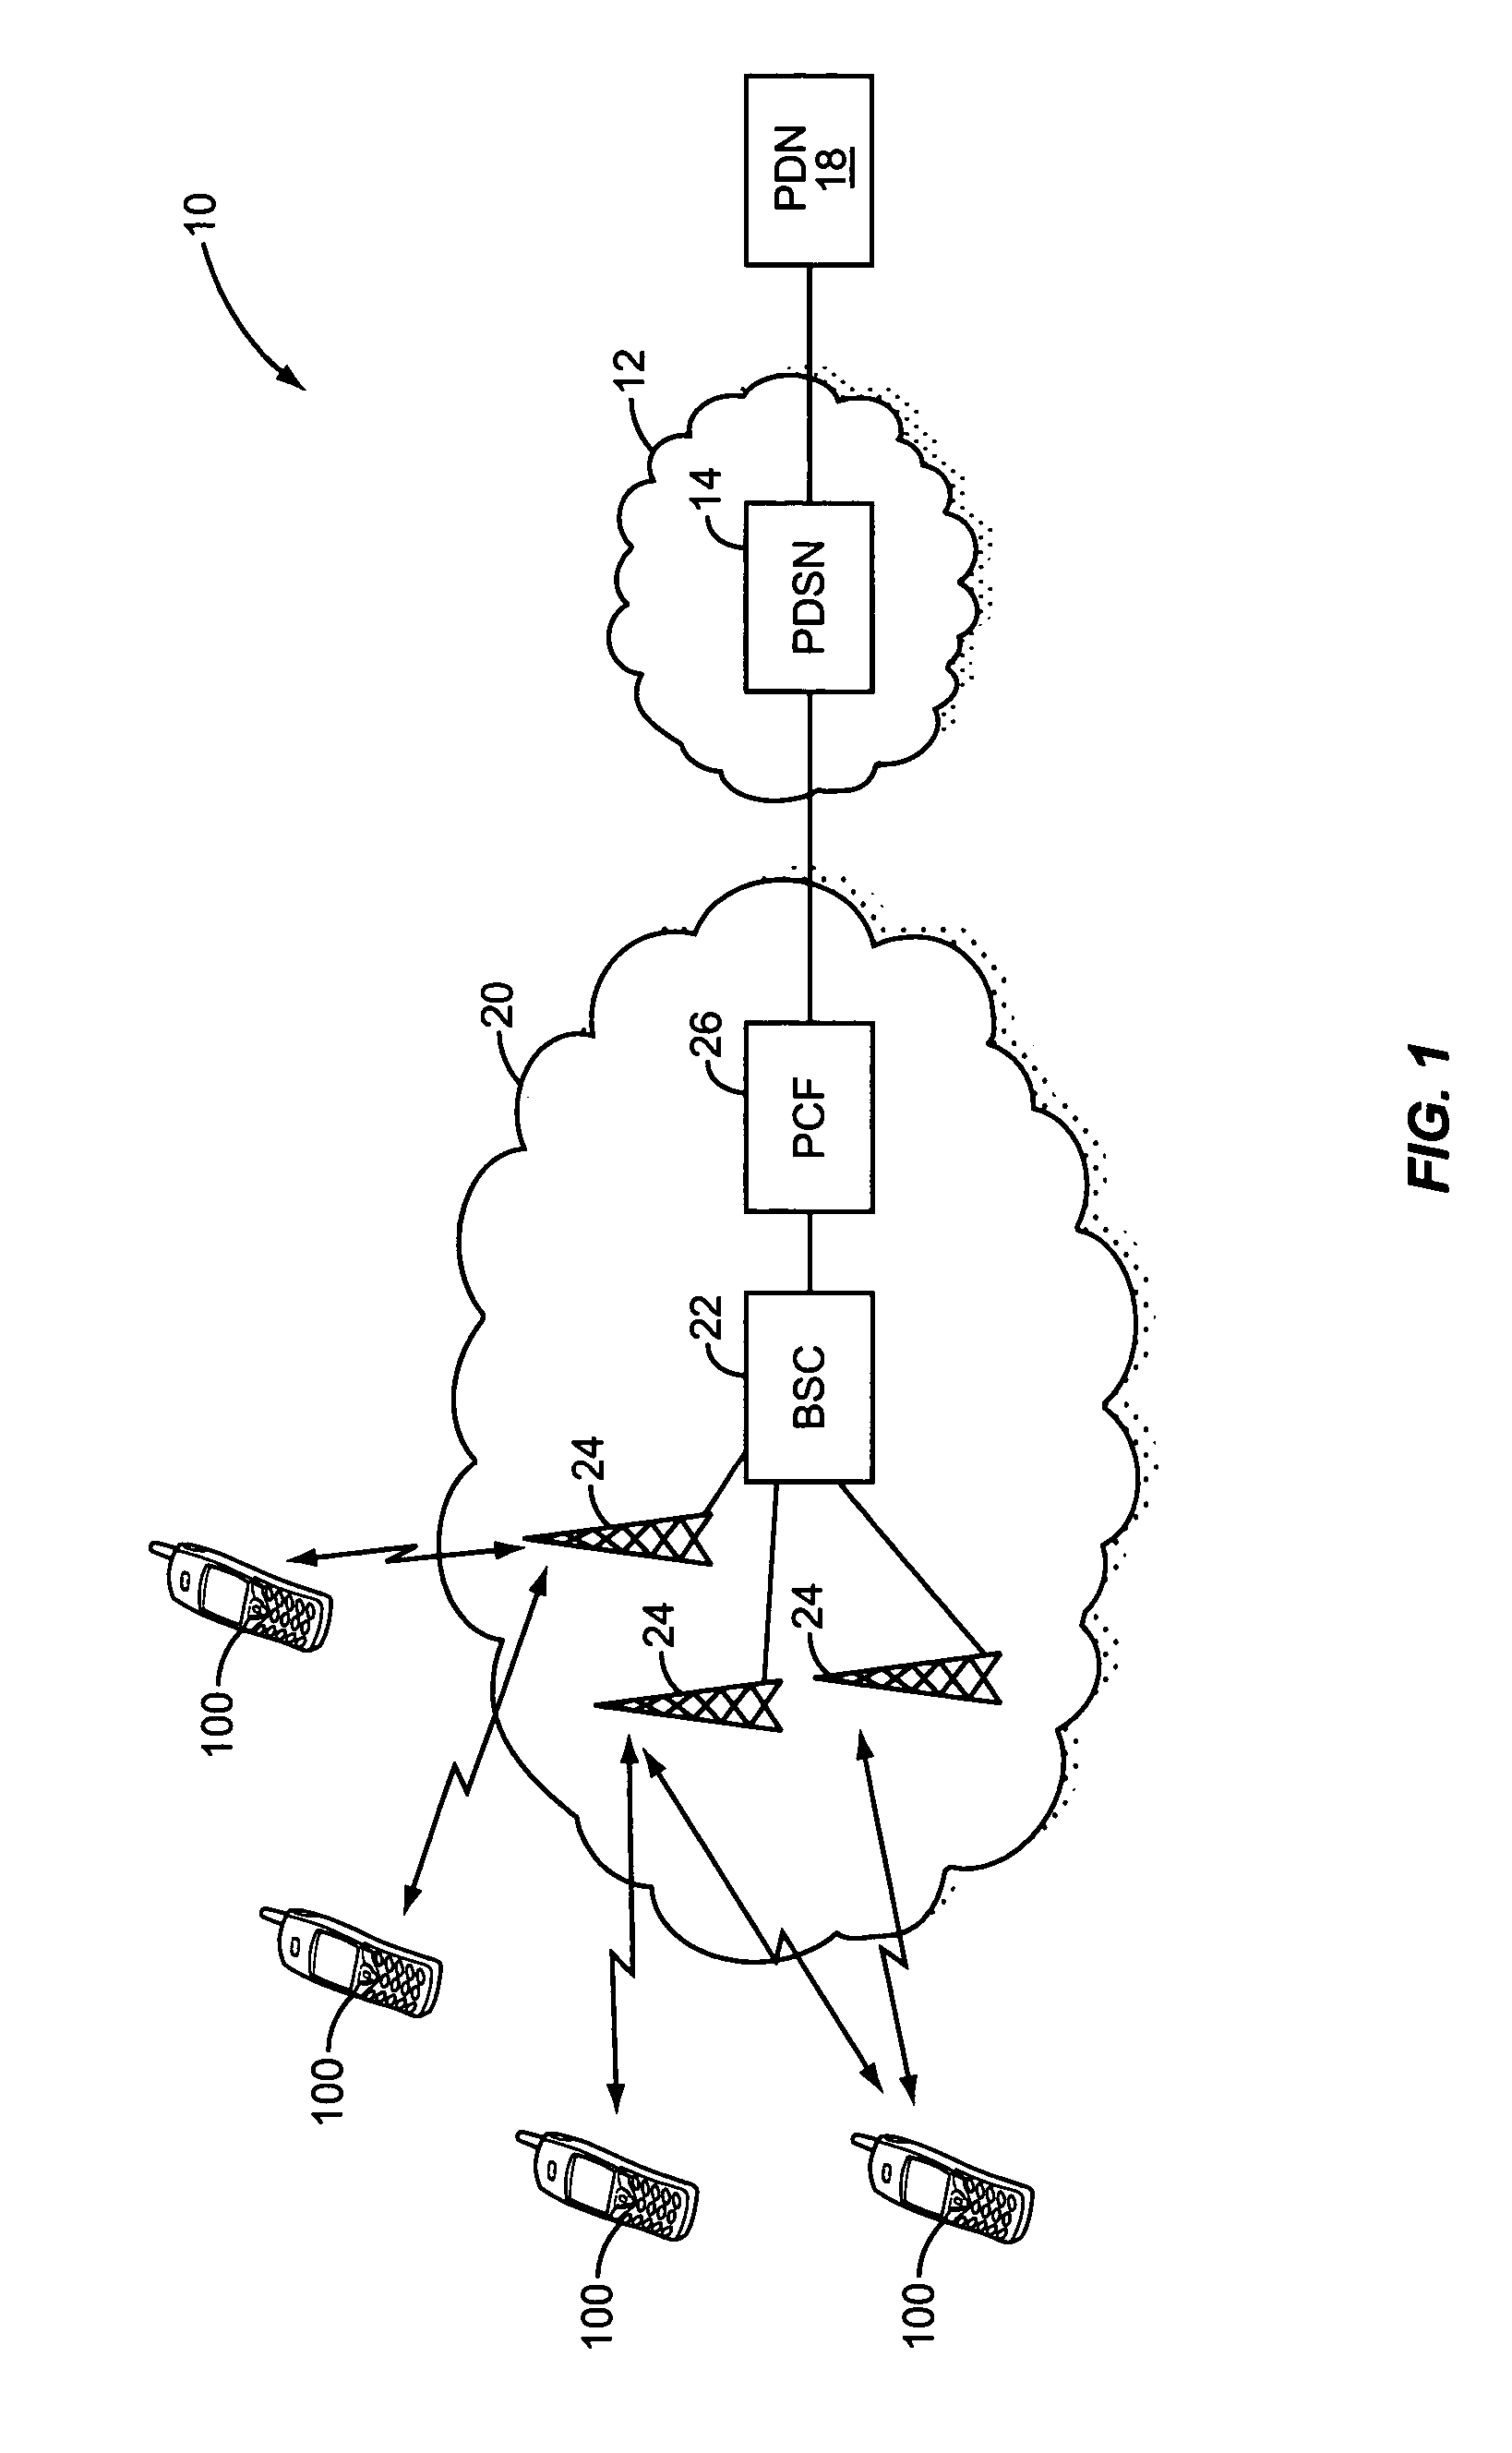 Power control for reverse packet data channel in CDMA systems